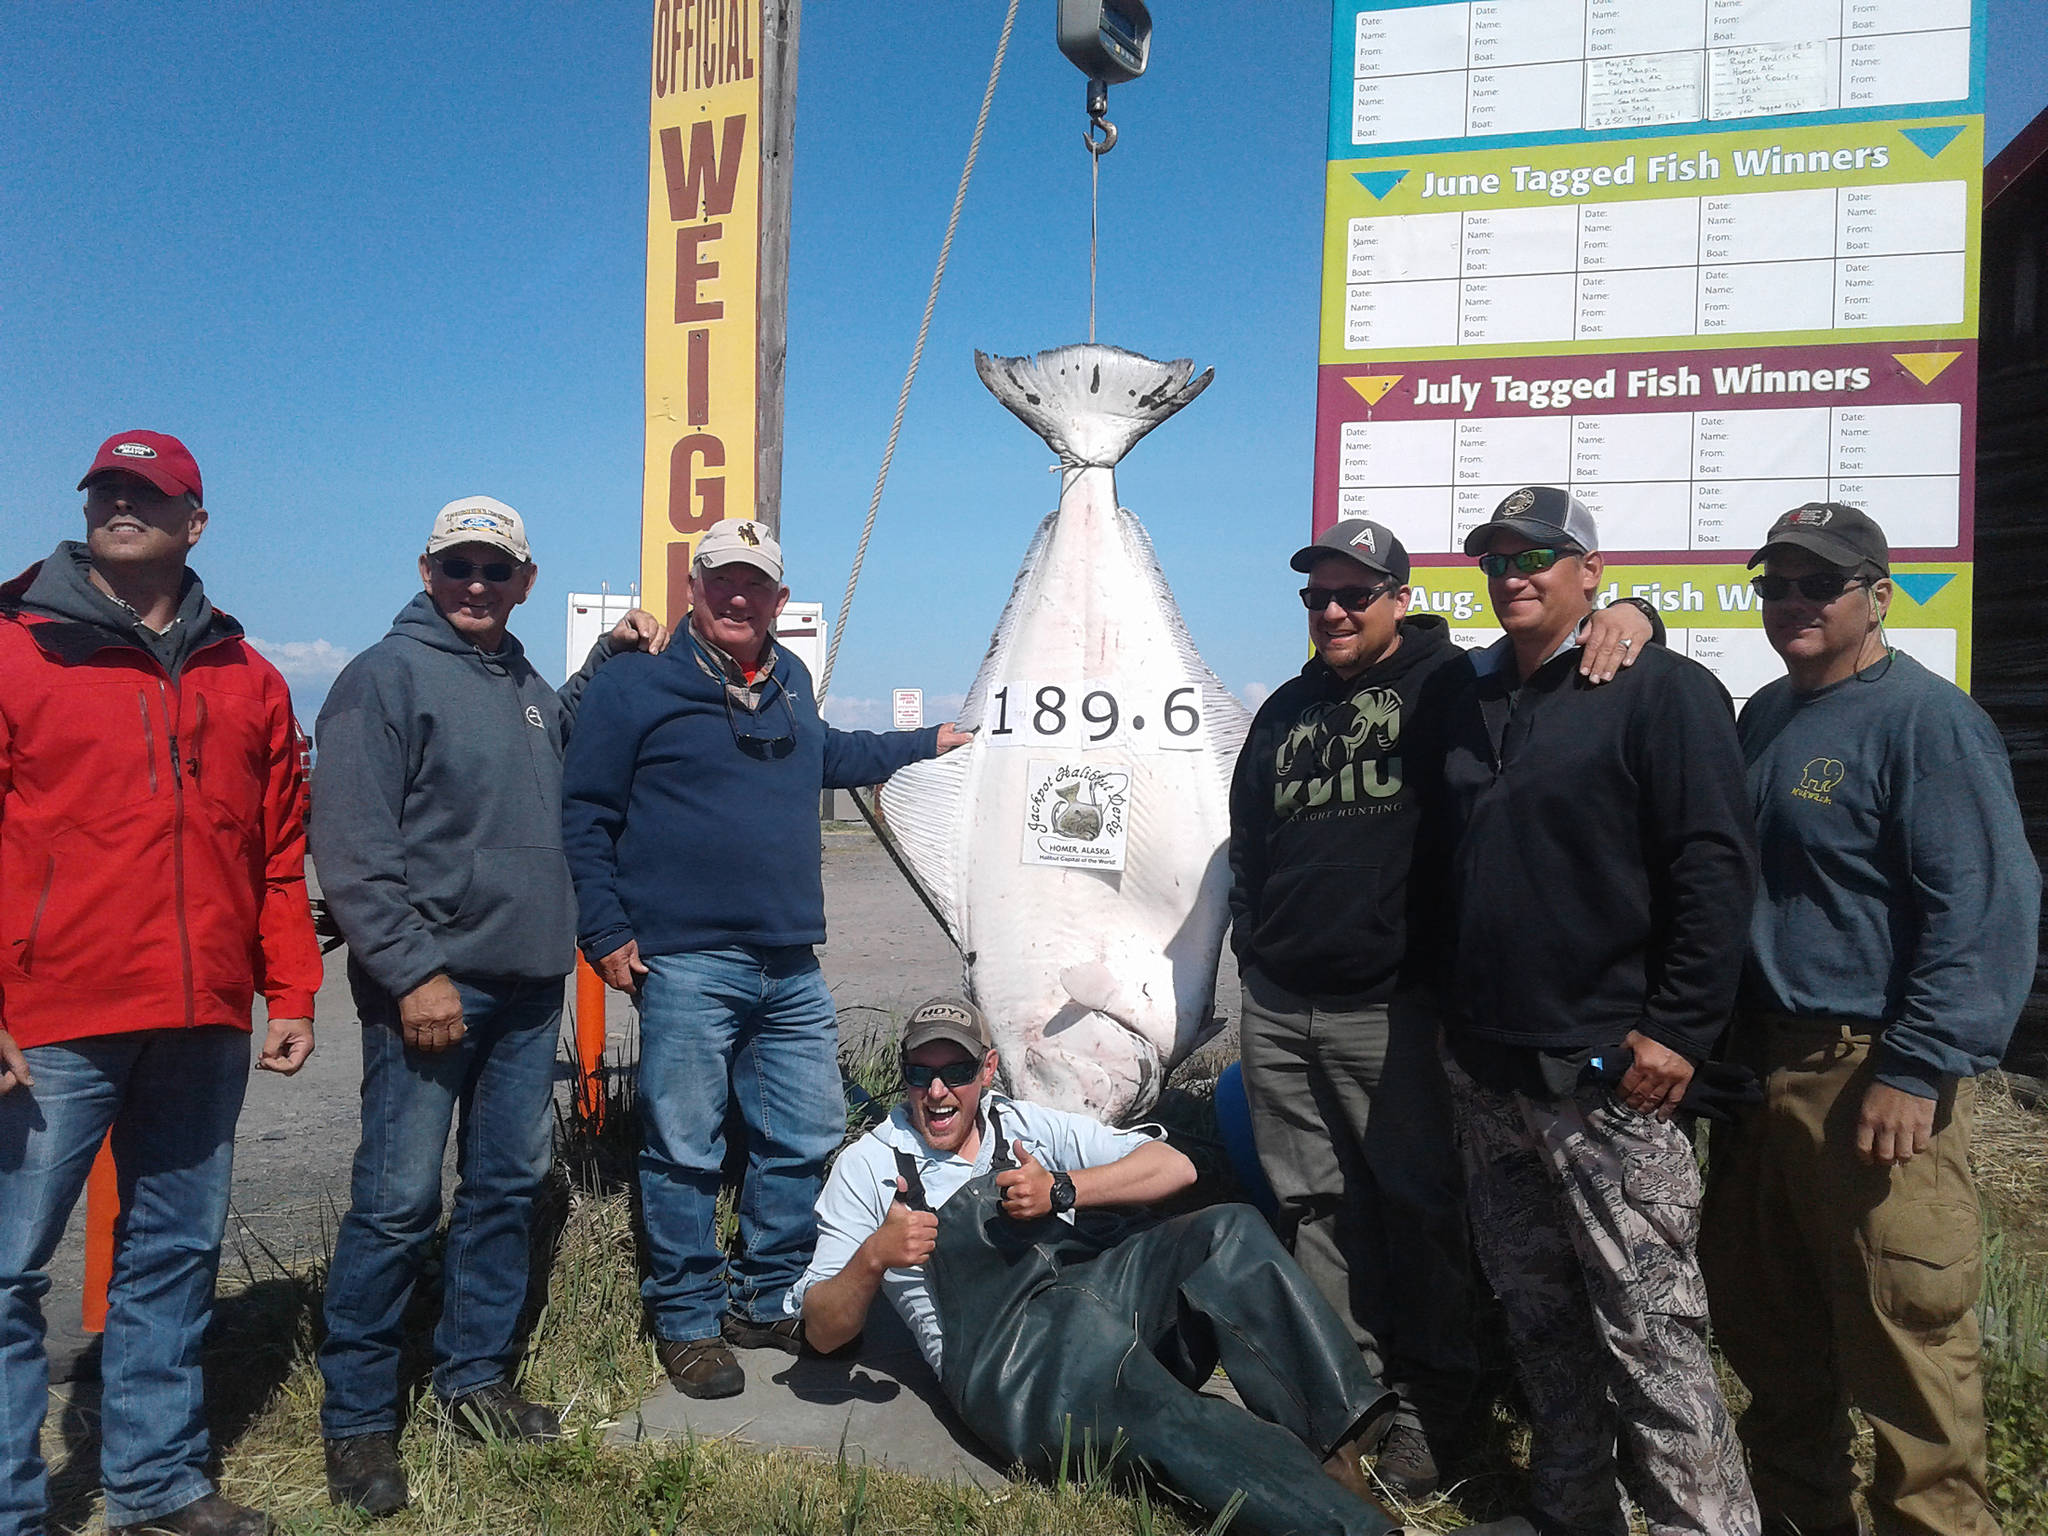 Butch Knutson of Gillette, Wyoming (third from the left) celebrates taking the lead in the Jackpot Halibut Derby on June 26, 2019, in Homer, Alaska. (Photo provided by Homer Chamber of Commerce)